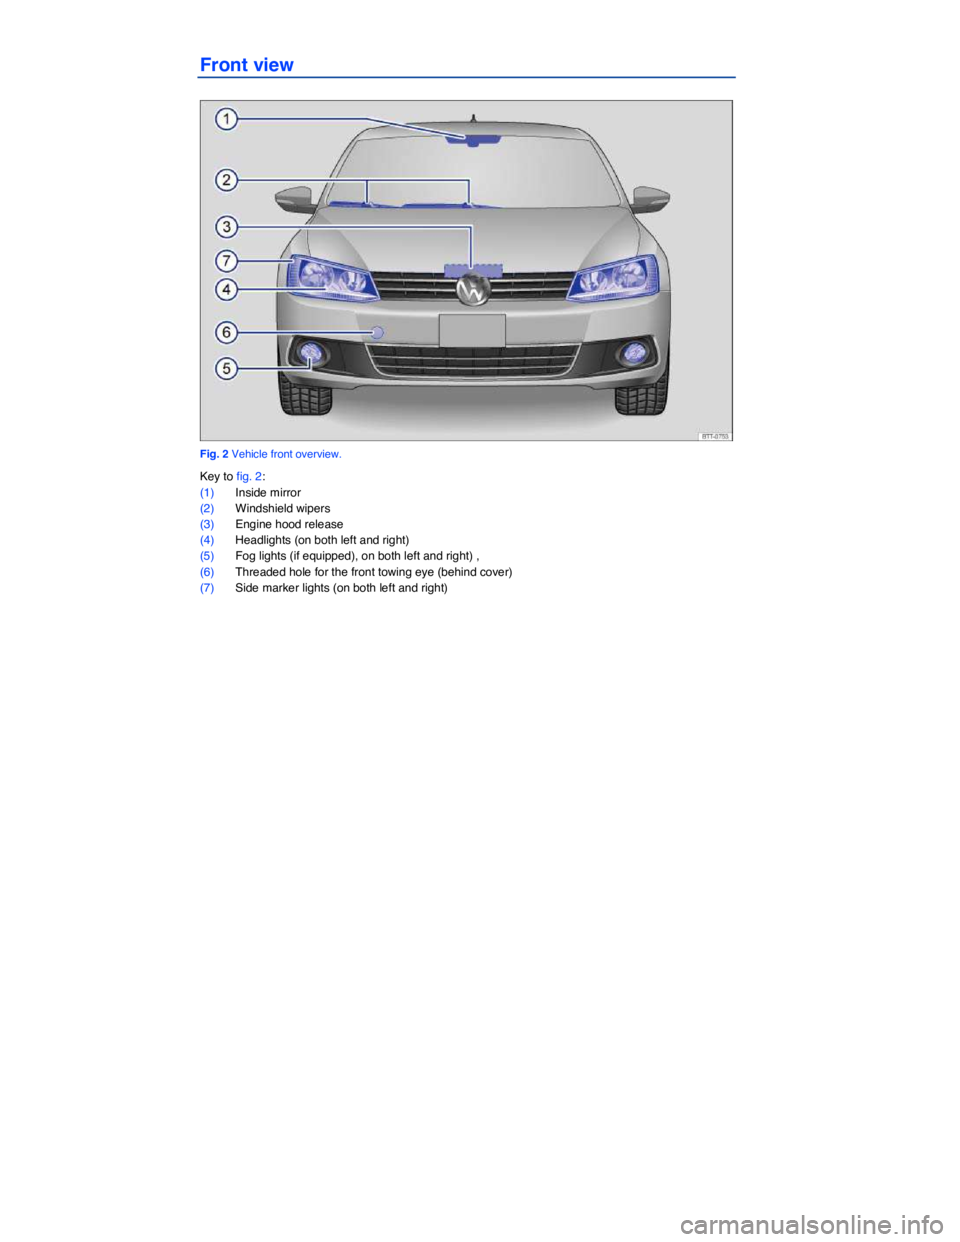 VOLKSWAGEN JETTA 2.5 SE 2011  Owners Manual  
Front view 
 
Fig. 2 Vehicle front overview. 
Key to fig. 2: 
(1) Inside mirror  
(2) Windshield wipers  
(3) Engine hood release  
(4) Headlights (on both left and right)  
(5) Fog lights (if equip